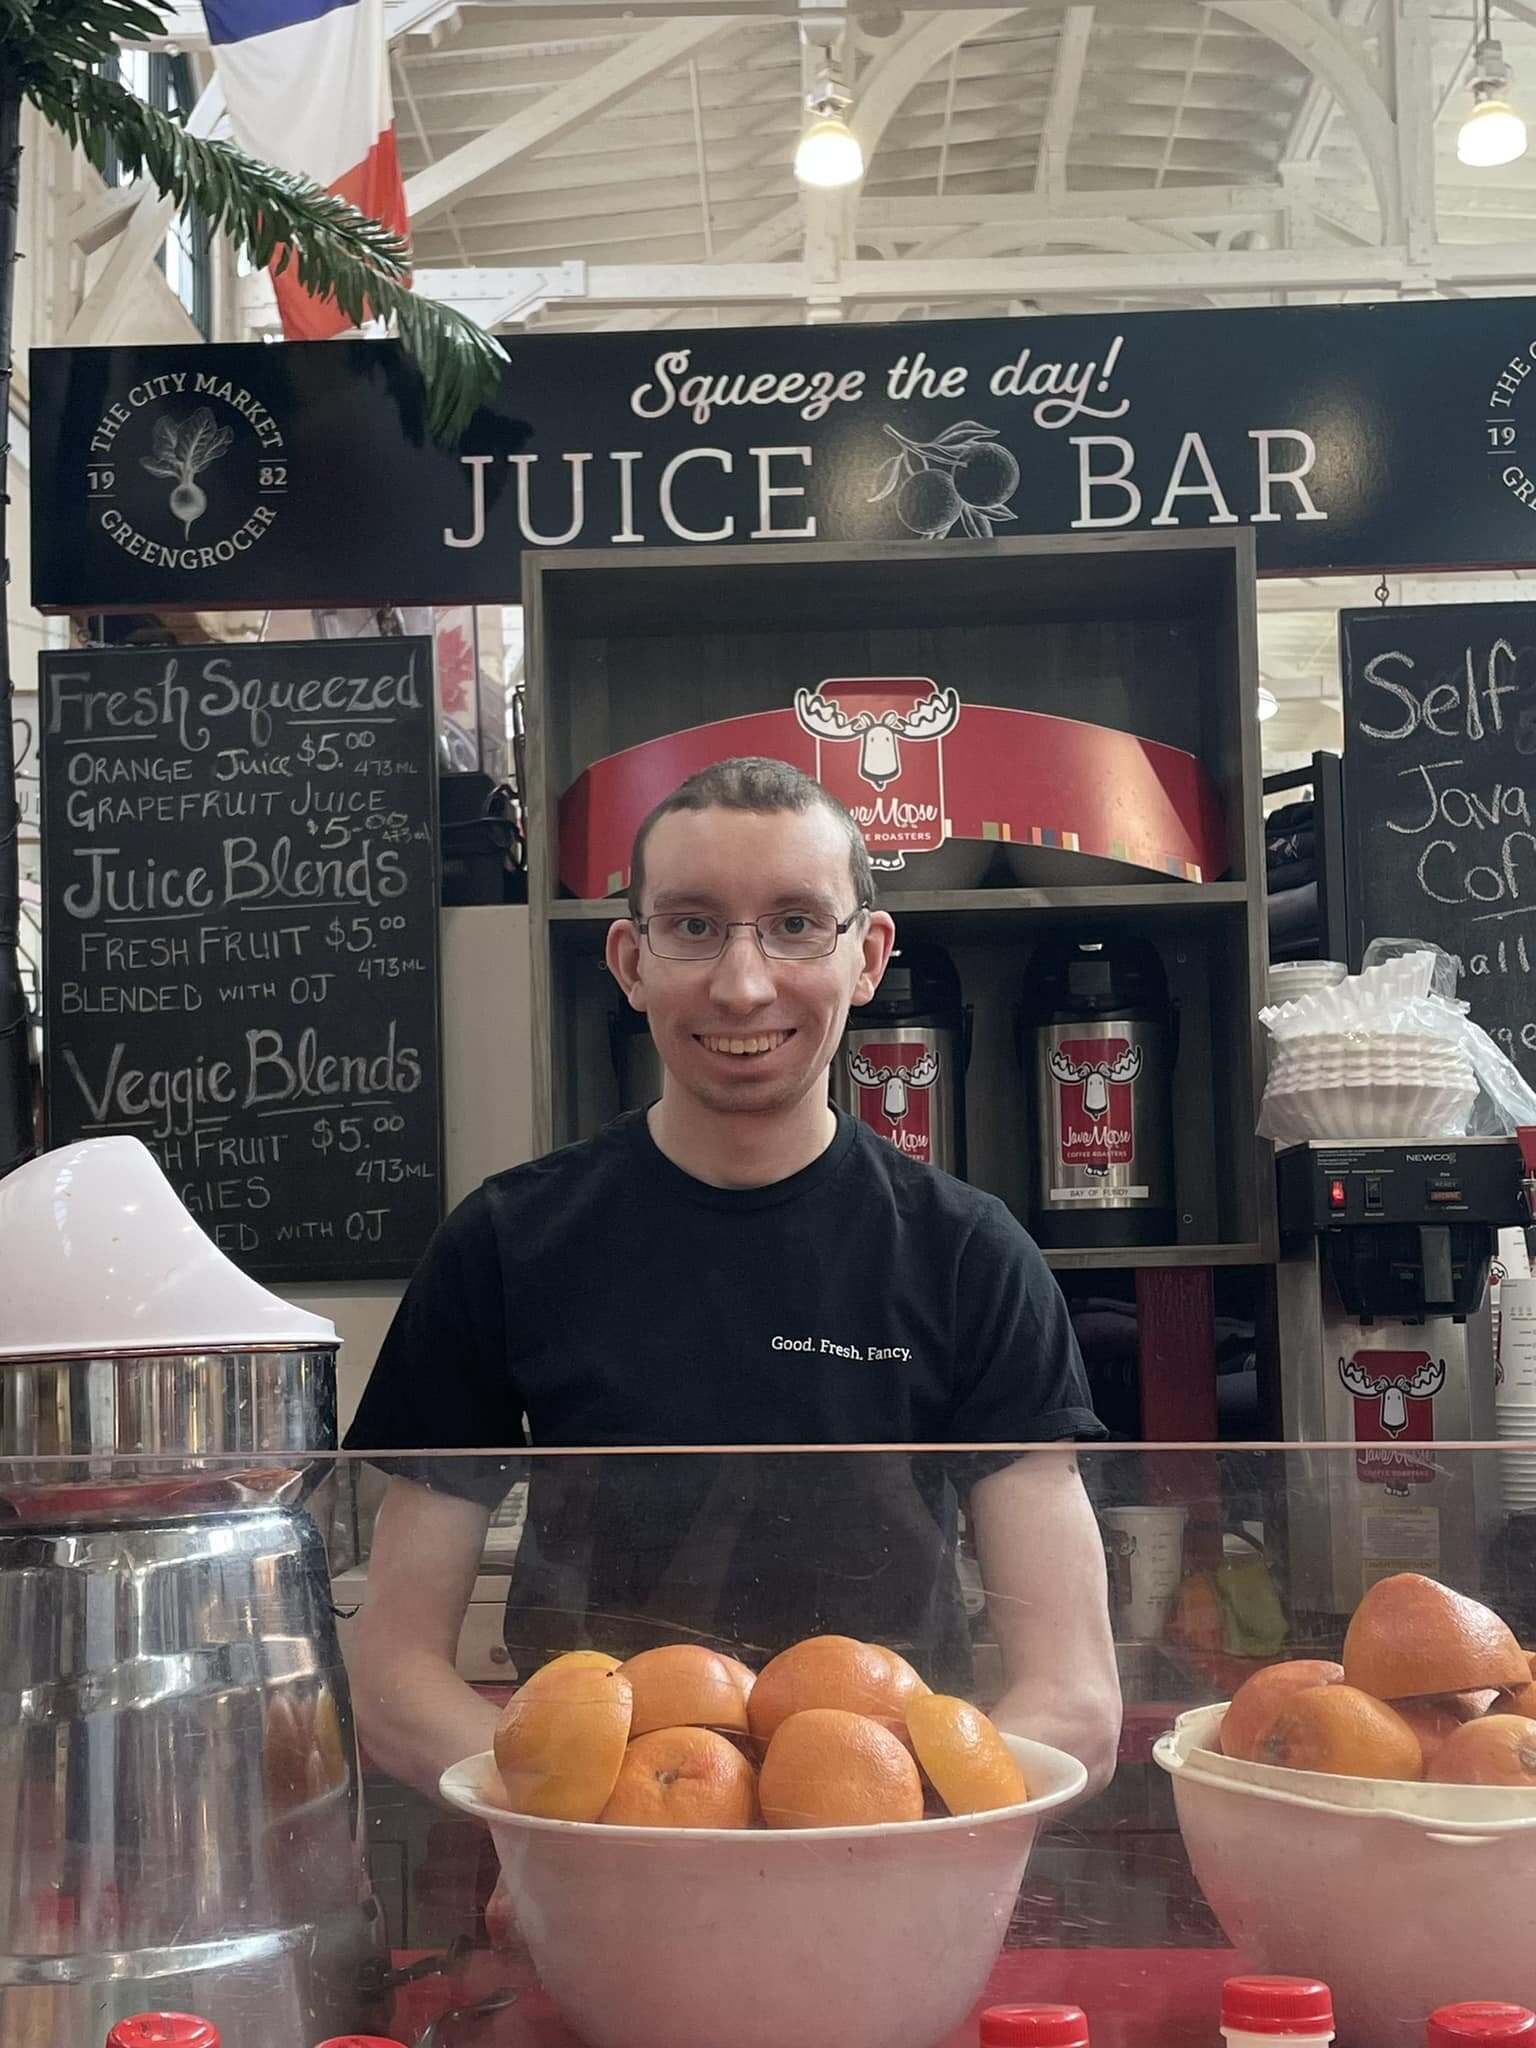 David is the king of puns 😊. And he is here to help you &ldquo;squeeze the day&rdquo;🍊🍊